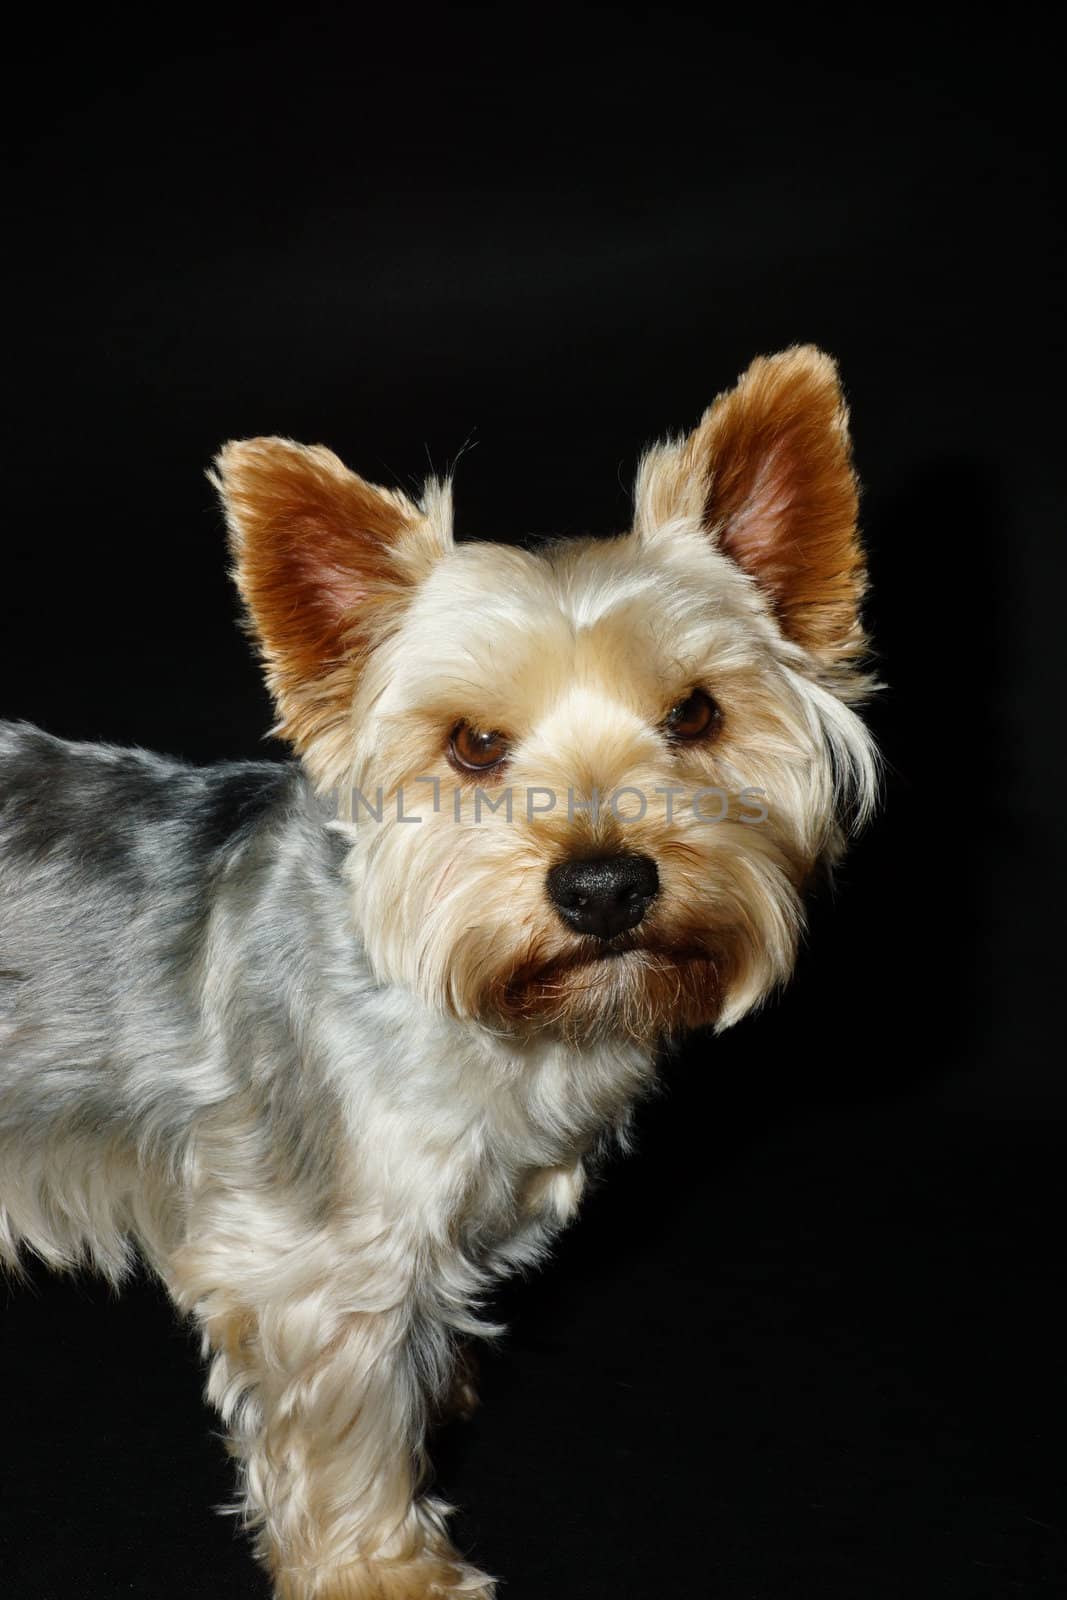 A dog (Yorkshire terrier) on a black background with a funny and curious eyes